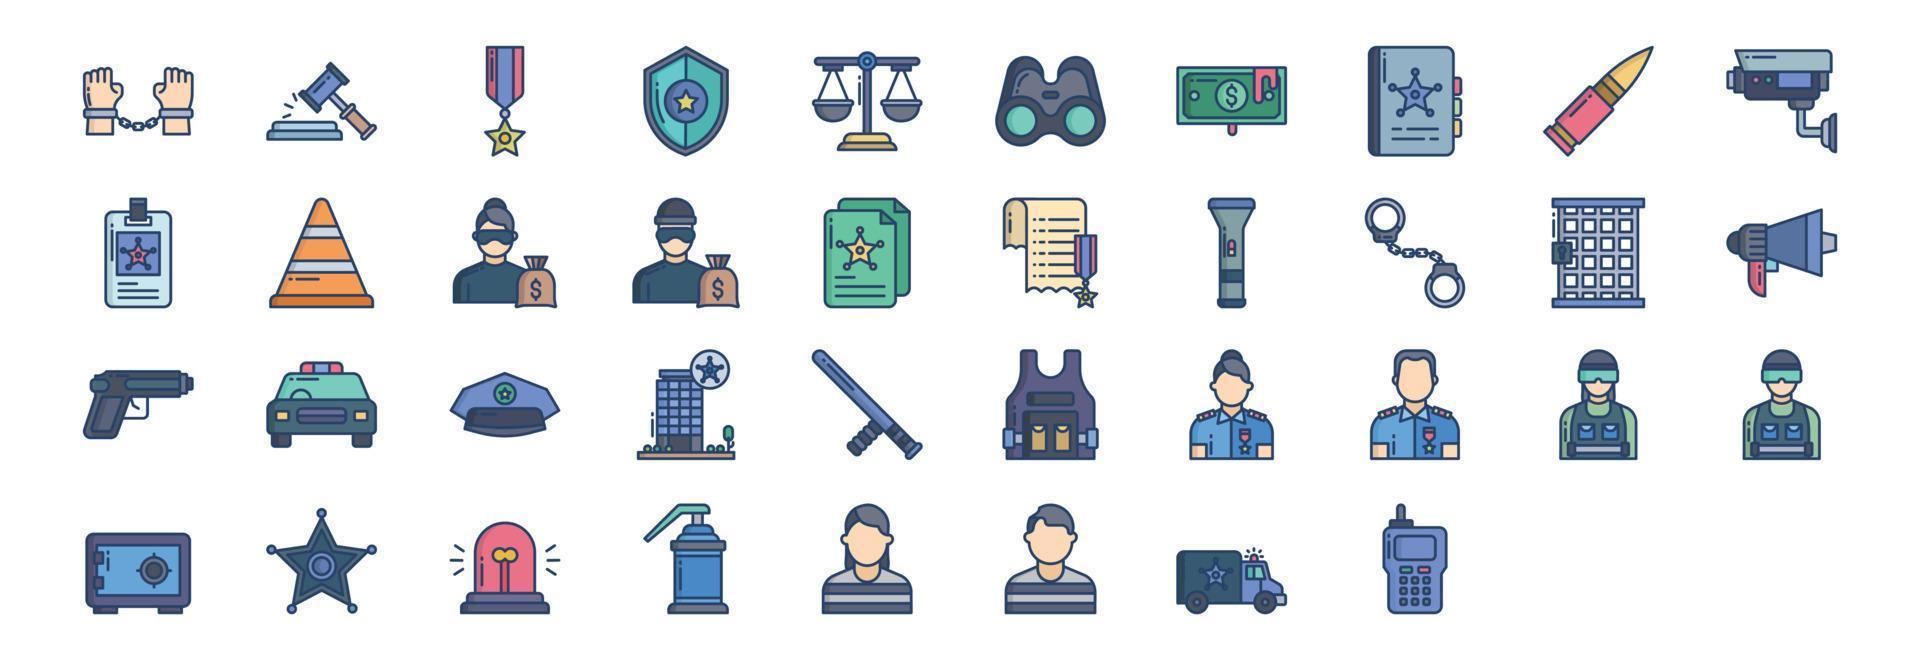 Collection of icons related to Police and Law, including icons like Arrest, Auction, Bullet, Binoculars and more. vector illustrations, Pixel Perfect set